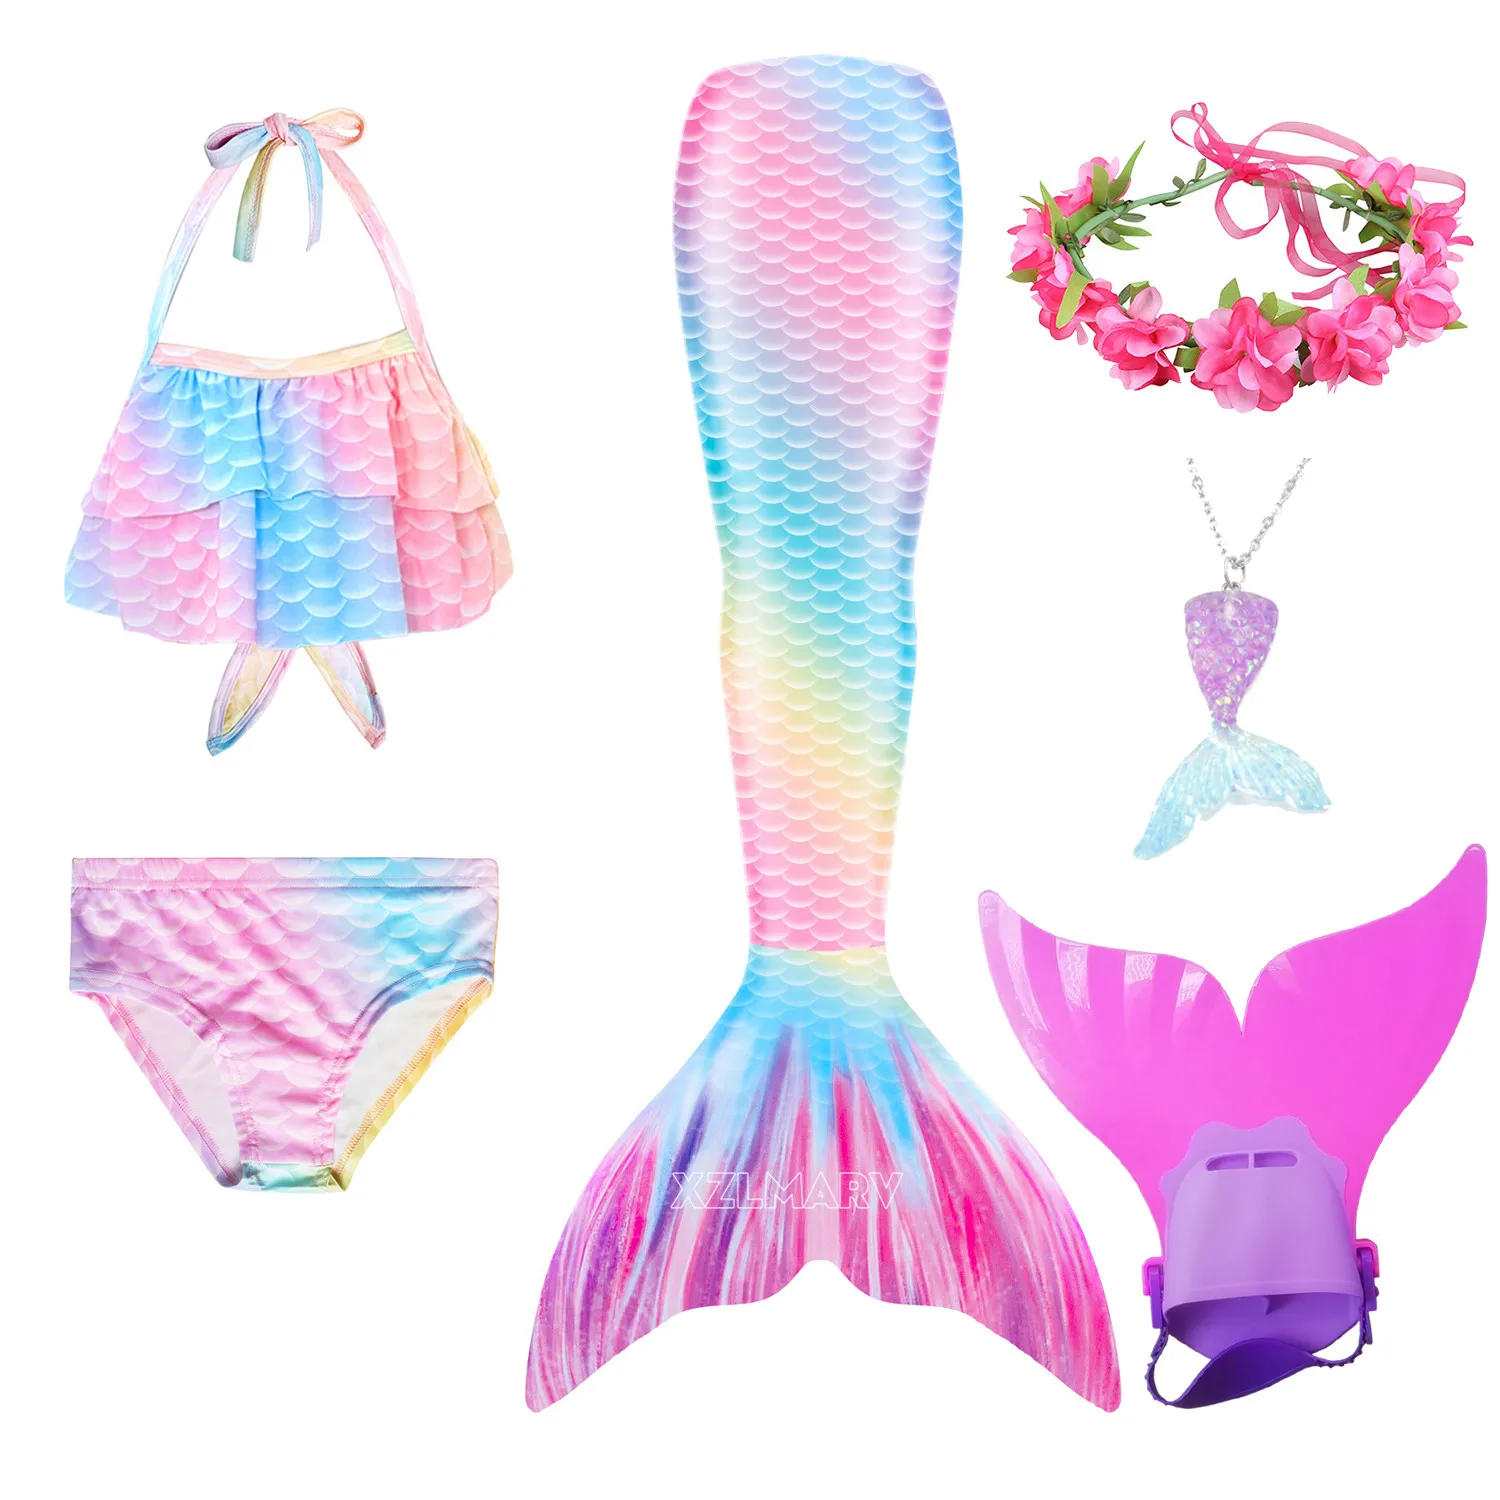 GALLDEALS Mermaid for Swimming Girls Swimsuit Princess Bikini Set with Monofin 9-10 Years Old 